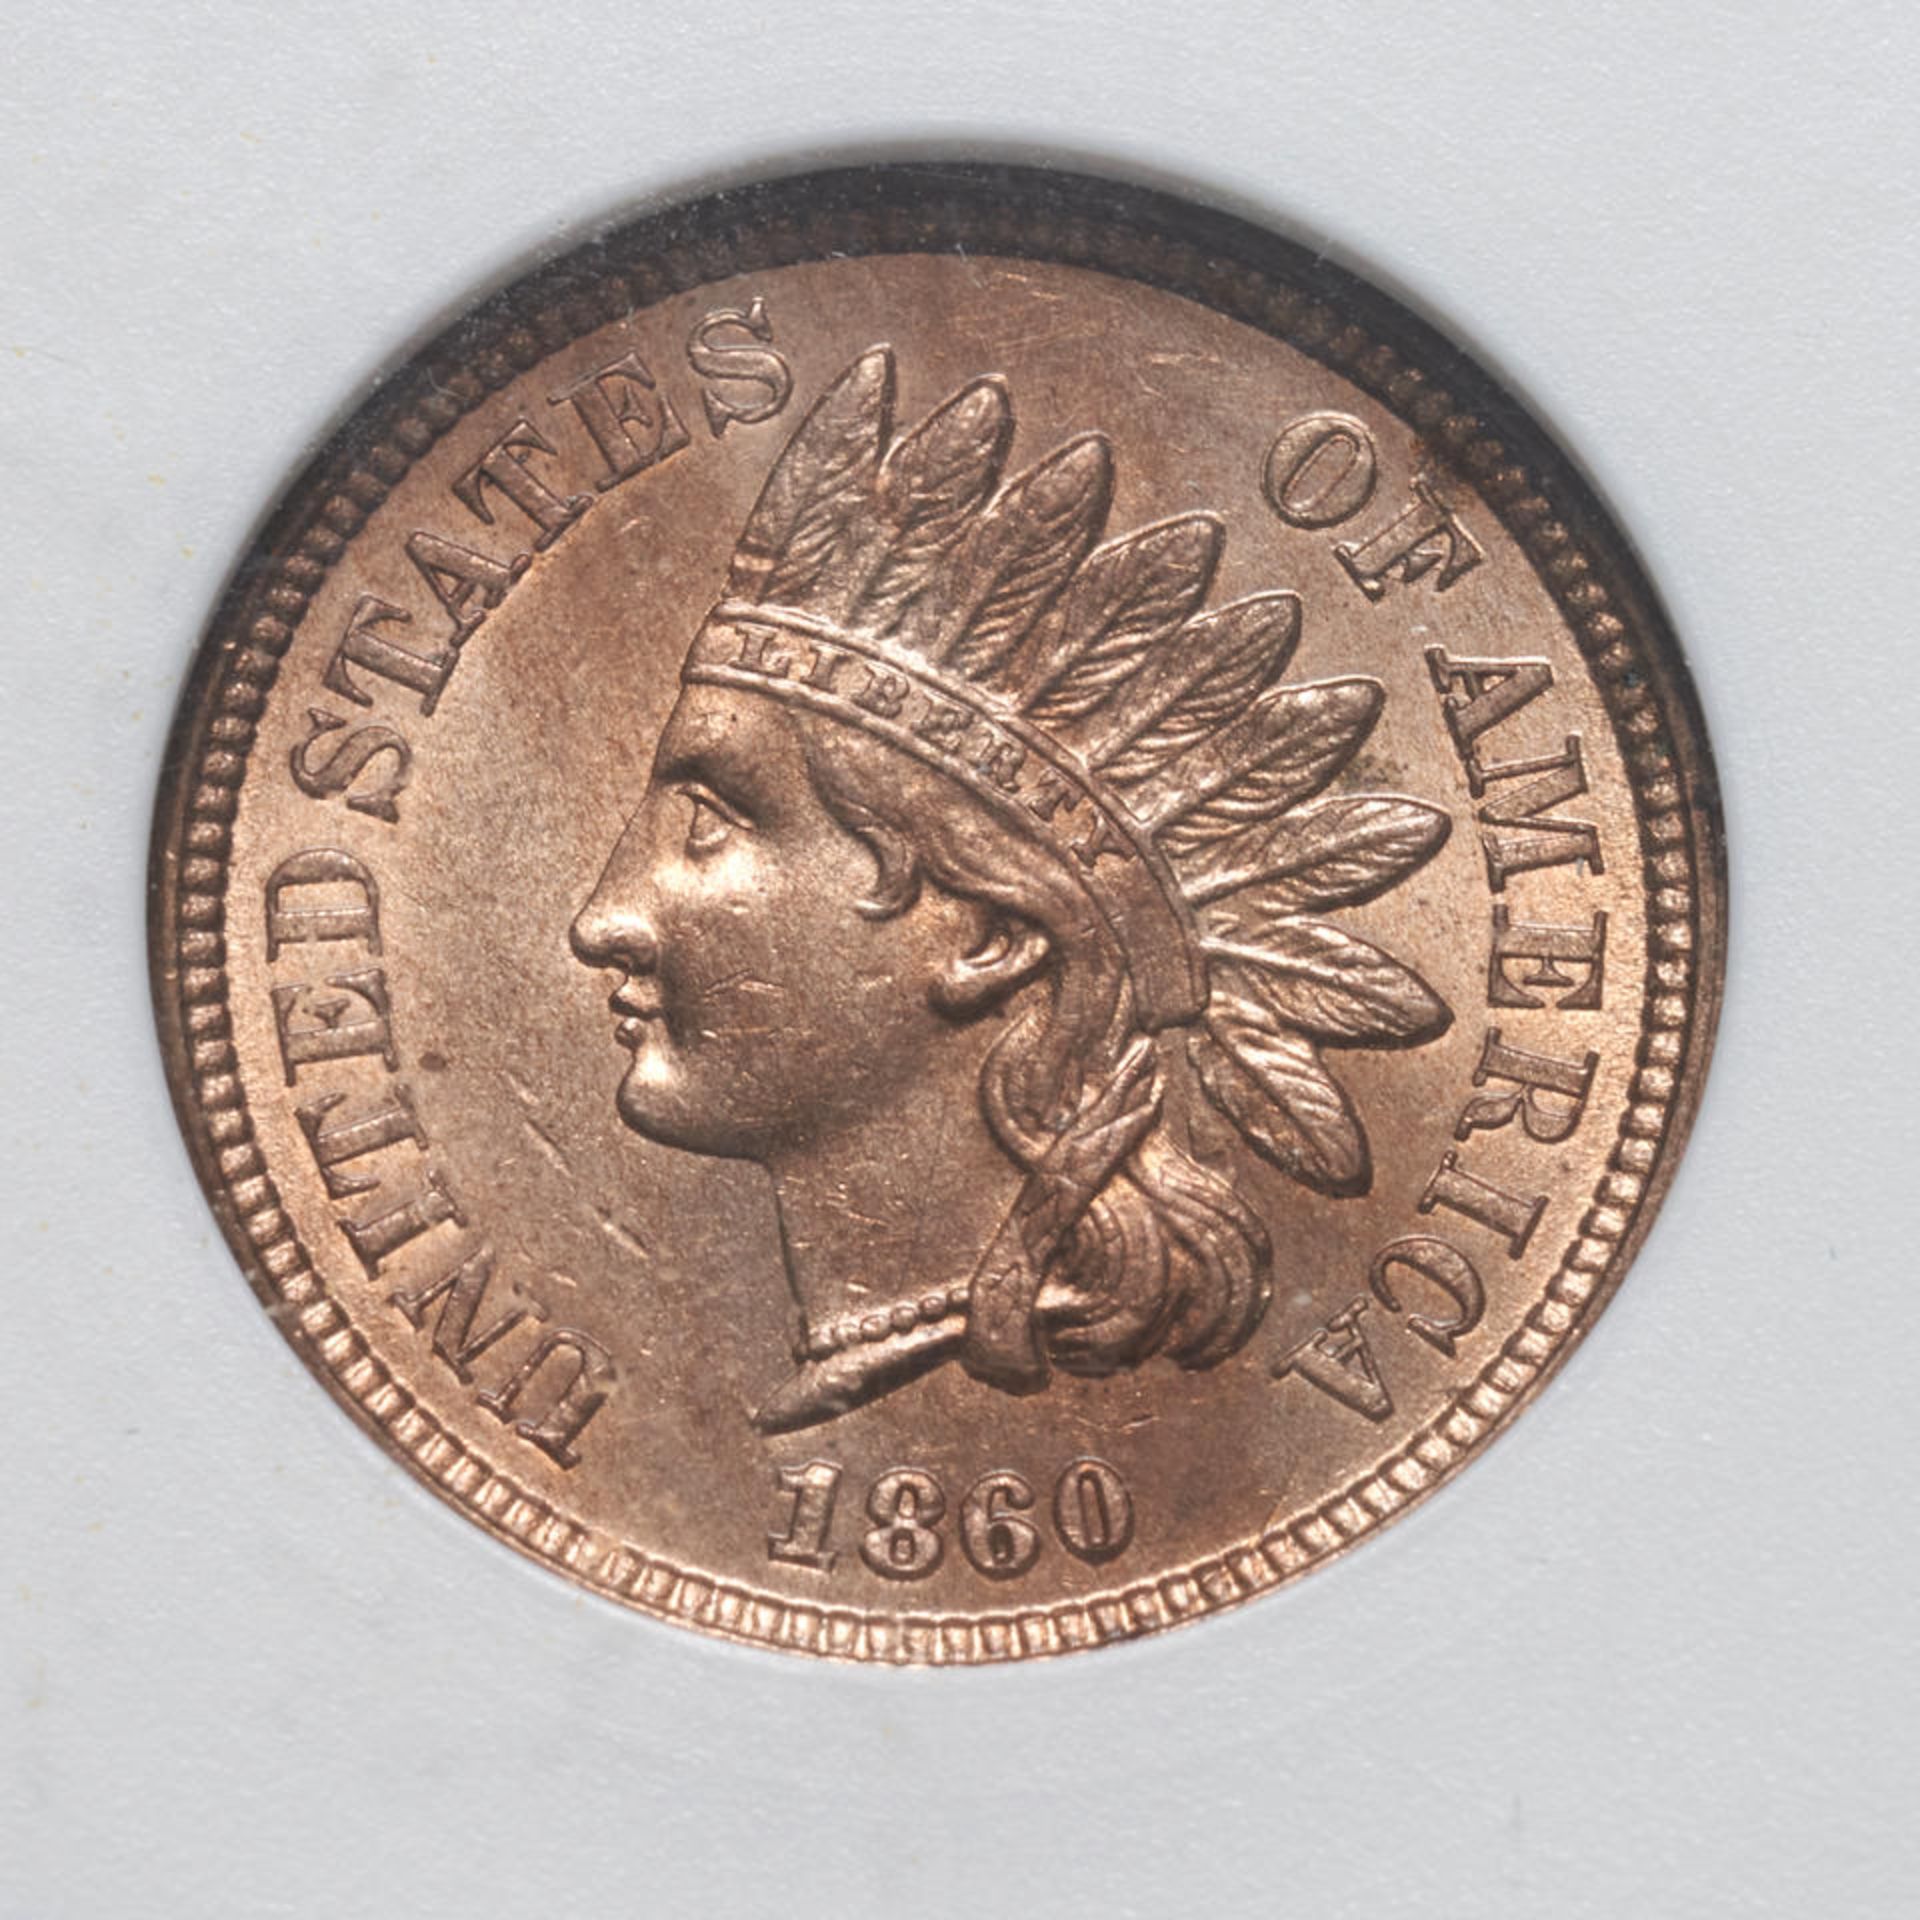 United States Four Indian Head Cents. - Image 6 of 6